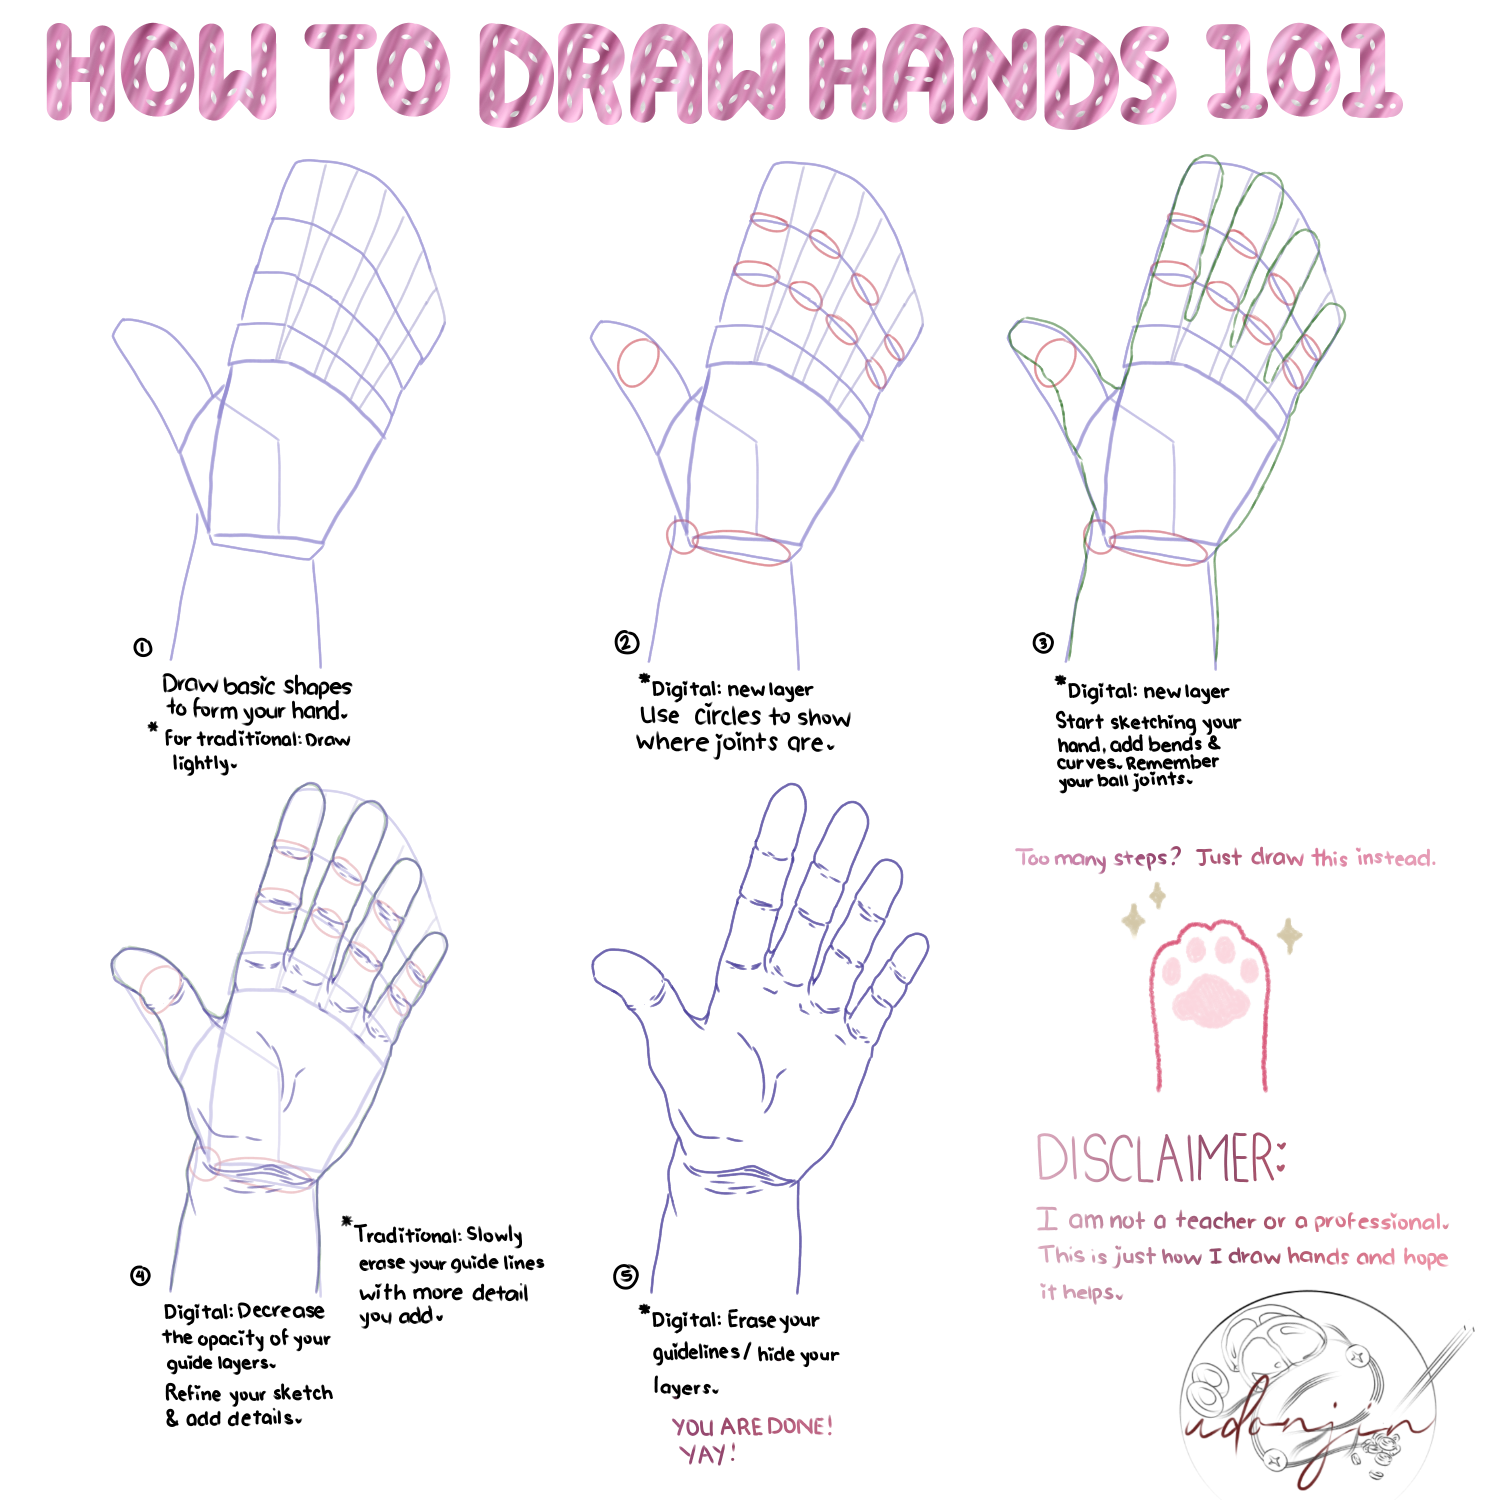 How to draw hands: step by step tutorial by UdonjinPng on DeviantArt